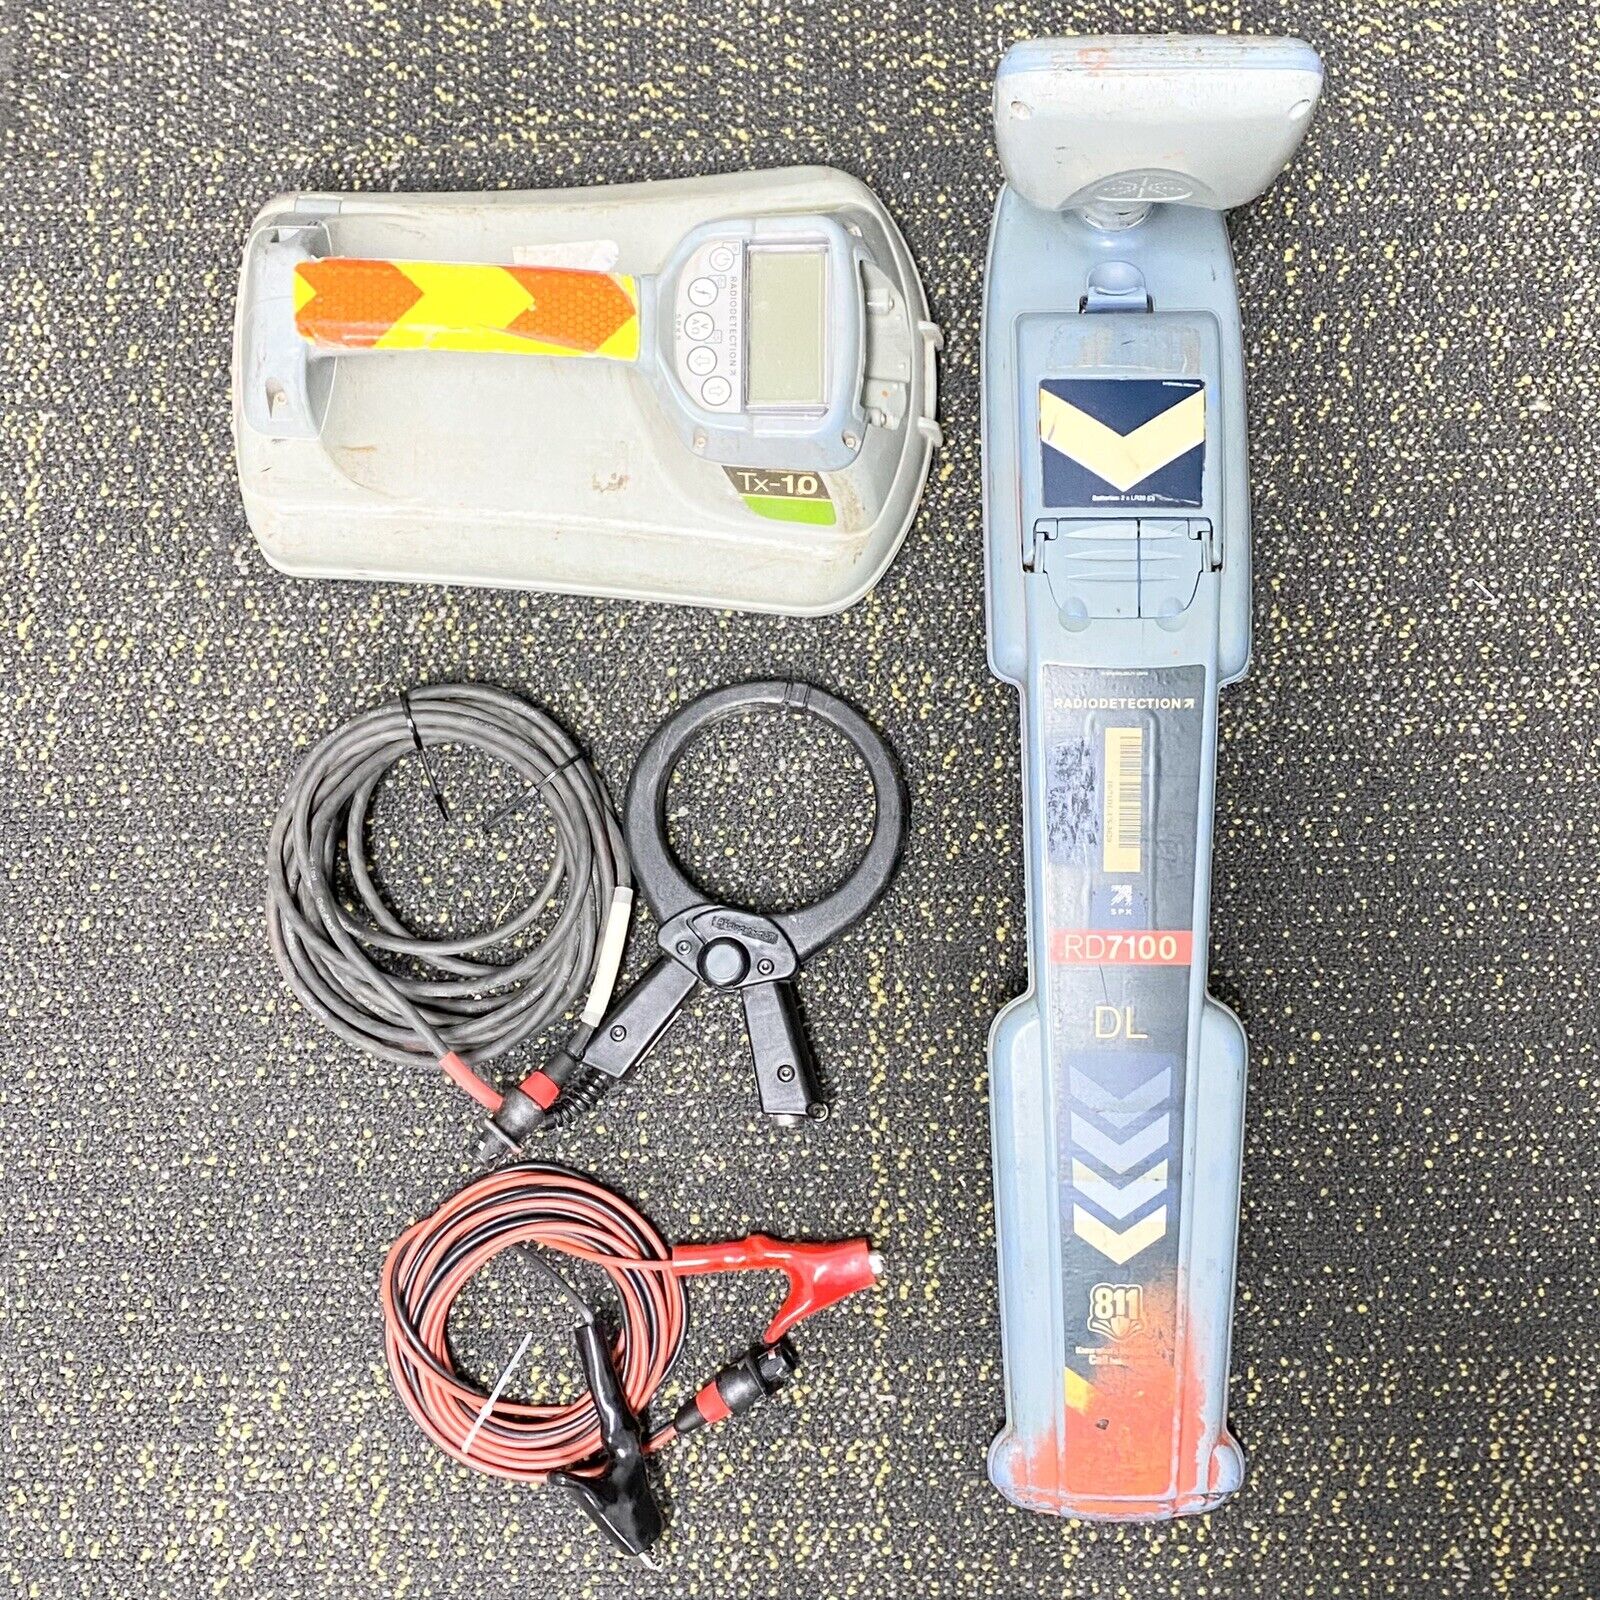 Radiodetection RD7100 Locator & TX-10 Transmitter W/Accessories USA